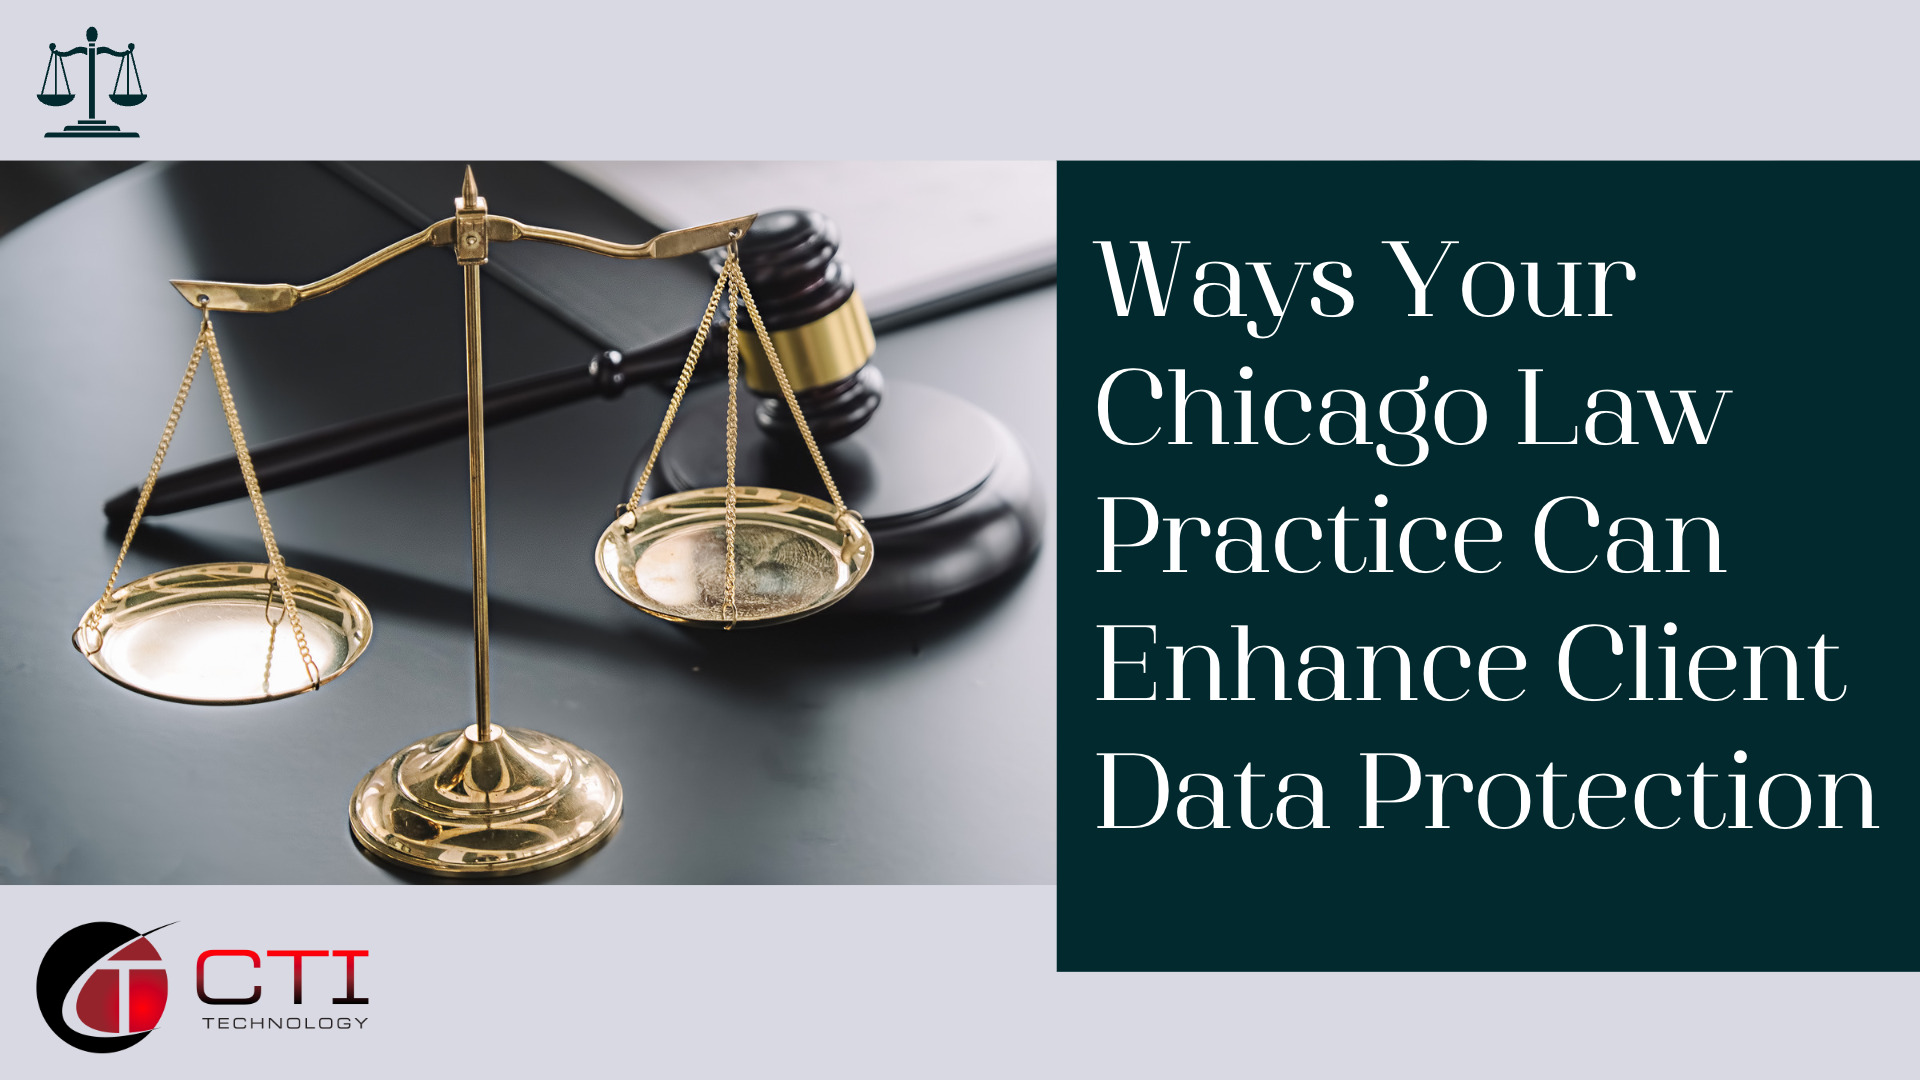 Ways Your Chicago Law Practice Can Enhance Client Data Protection